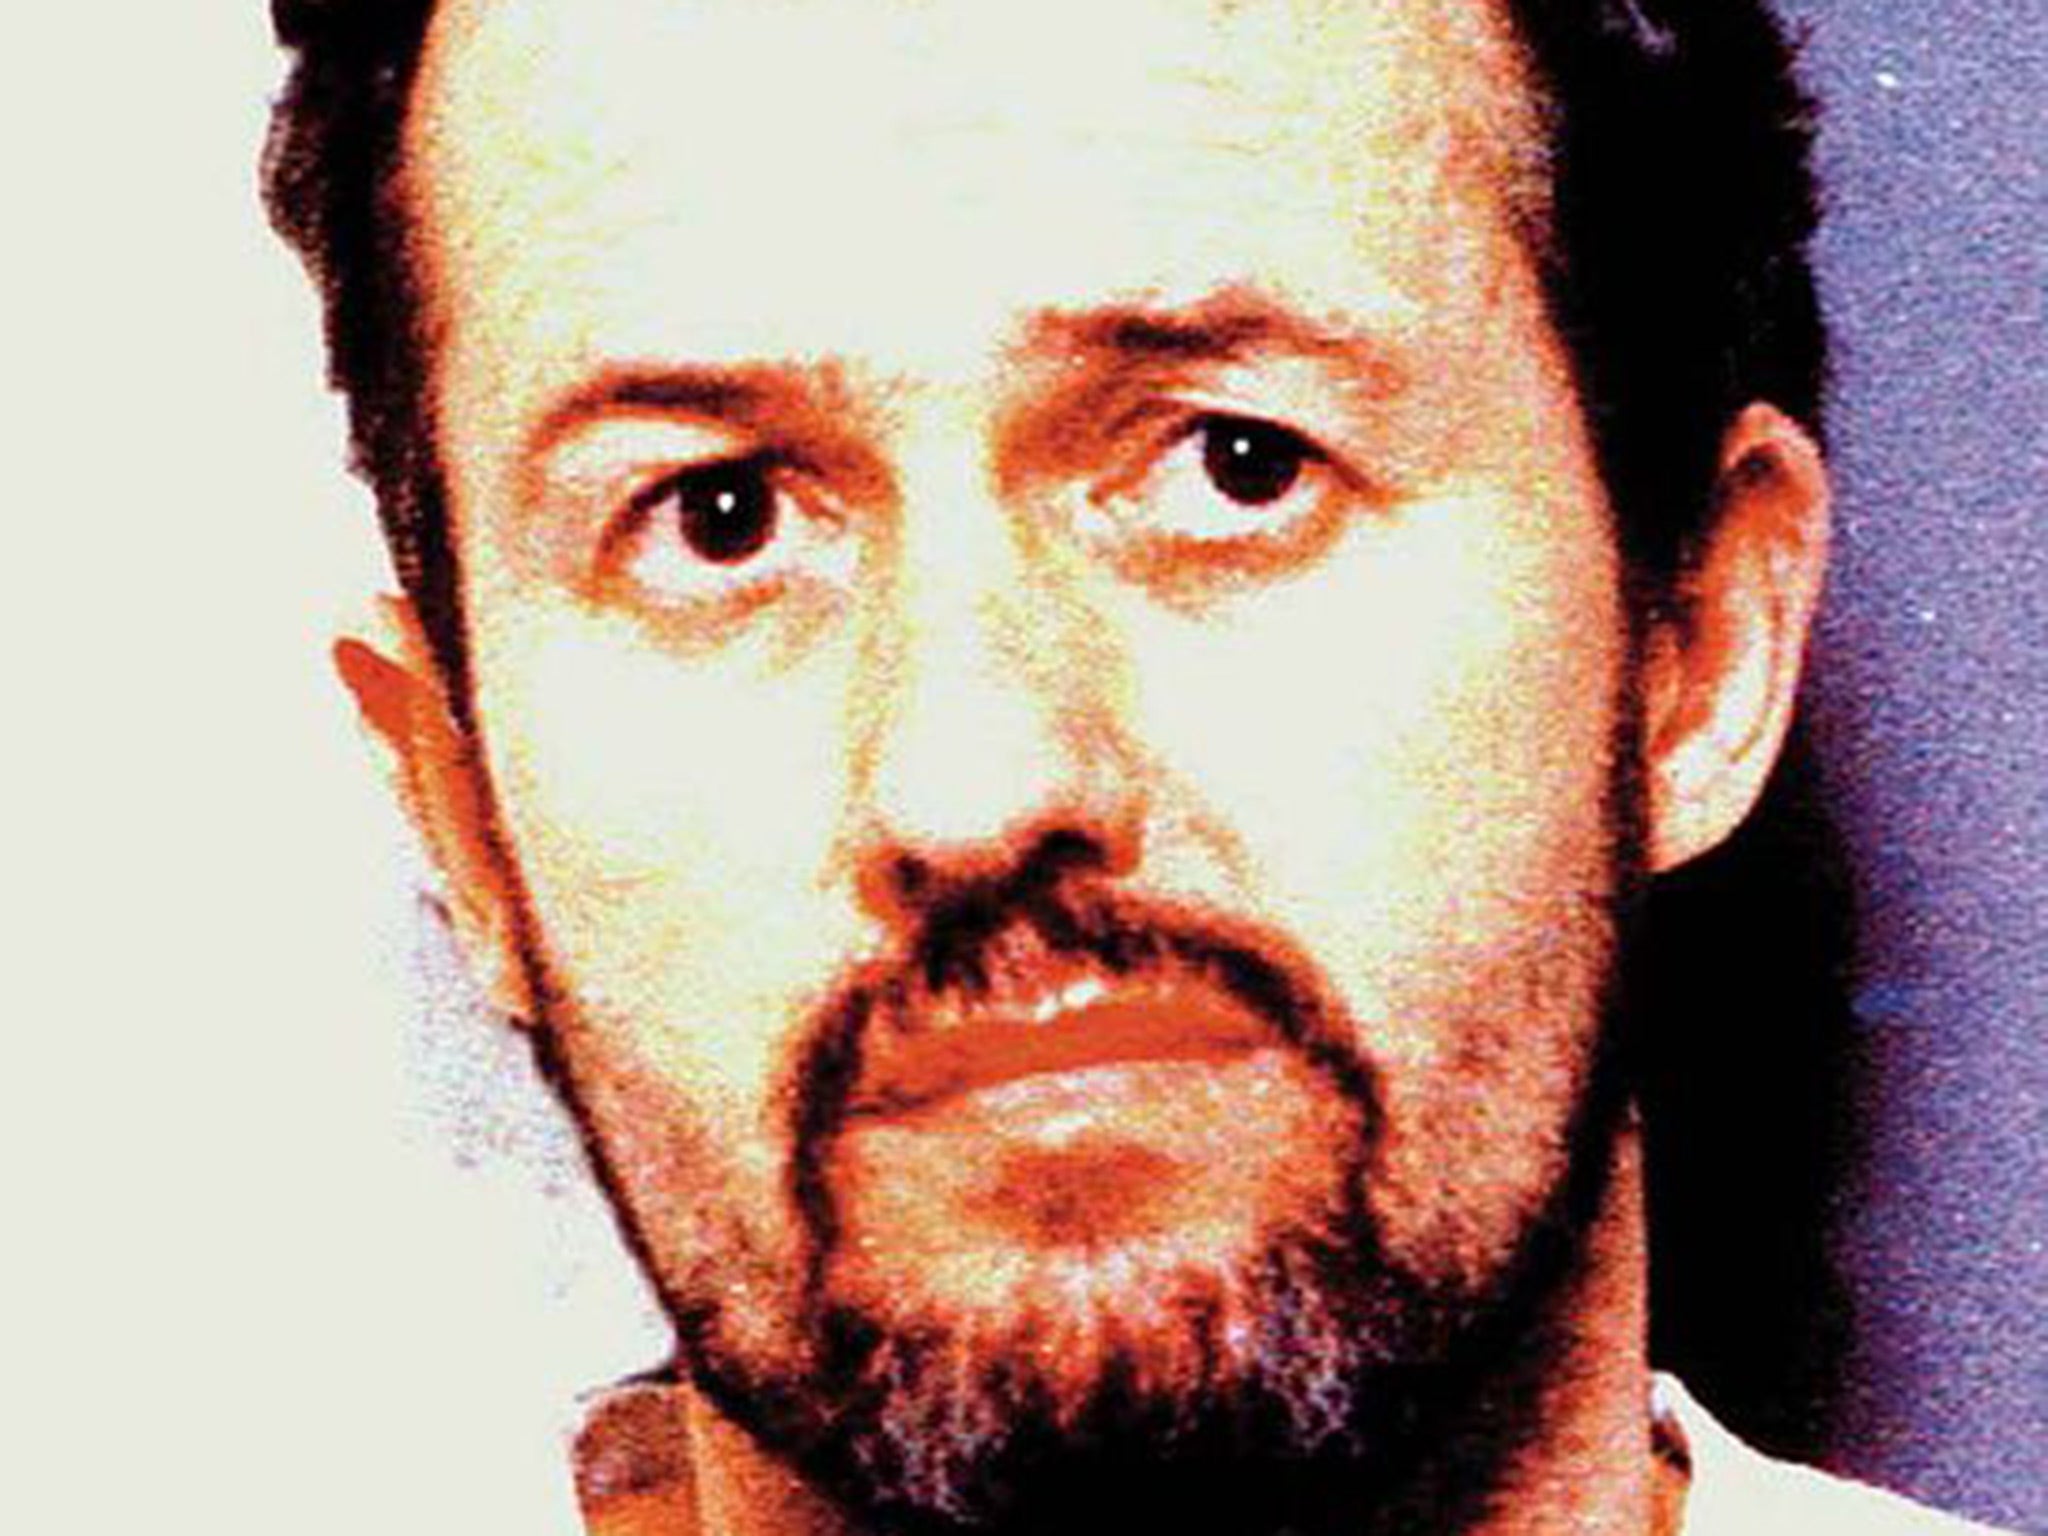 Barry Bennell has pleaded not guilty to 20 child sex offences